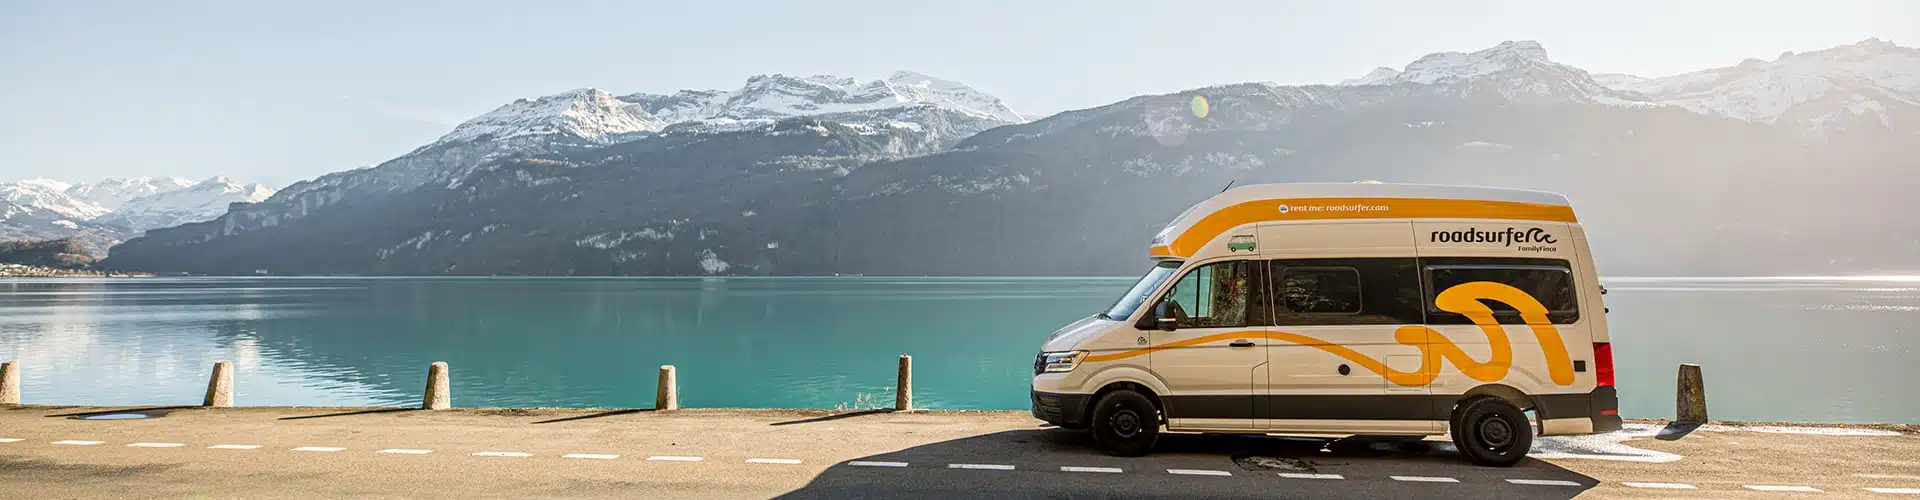 Roadsurfer sprinter van camper in front of a lake and snow-covered mountains in Switzerland